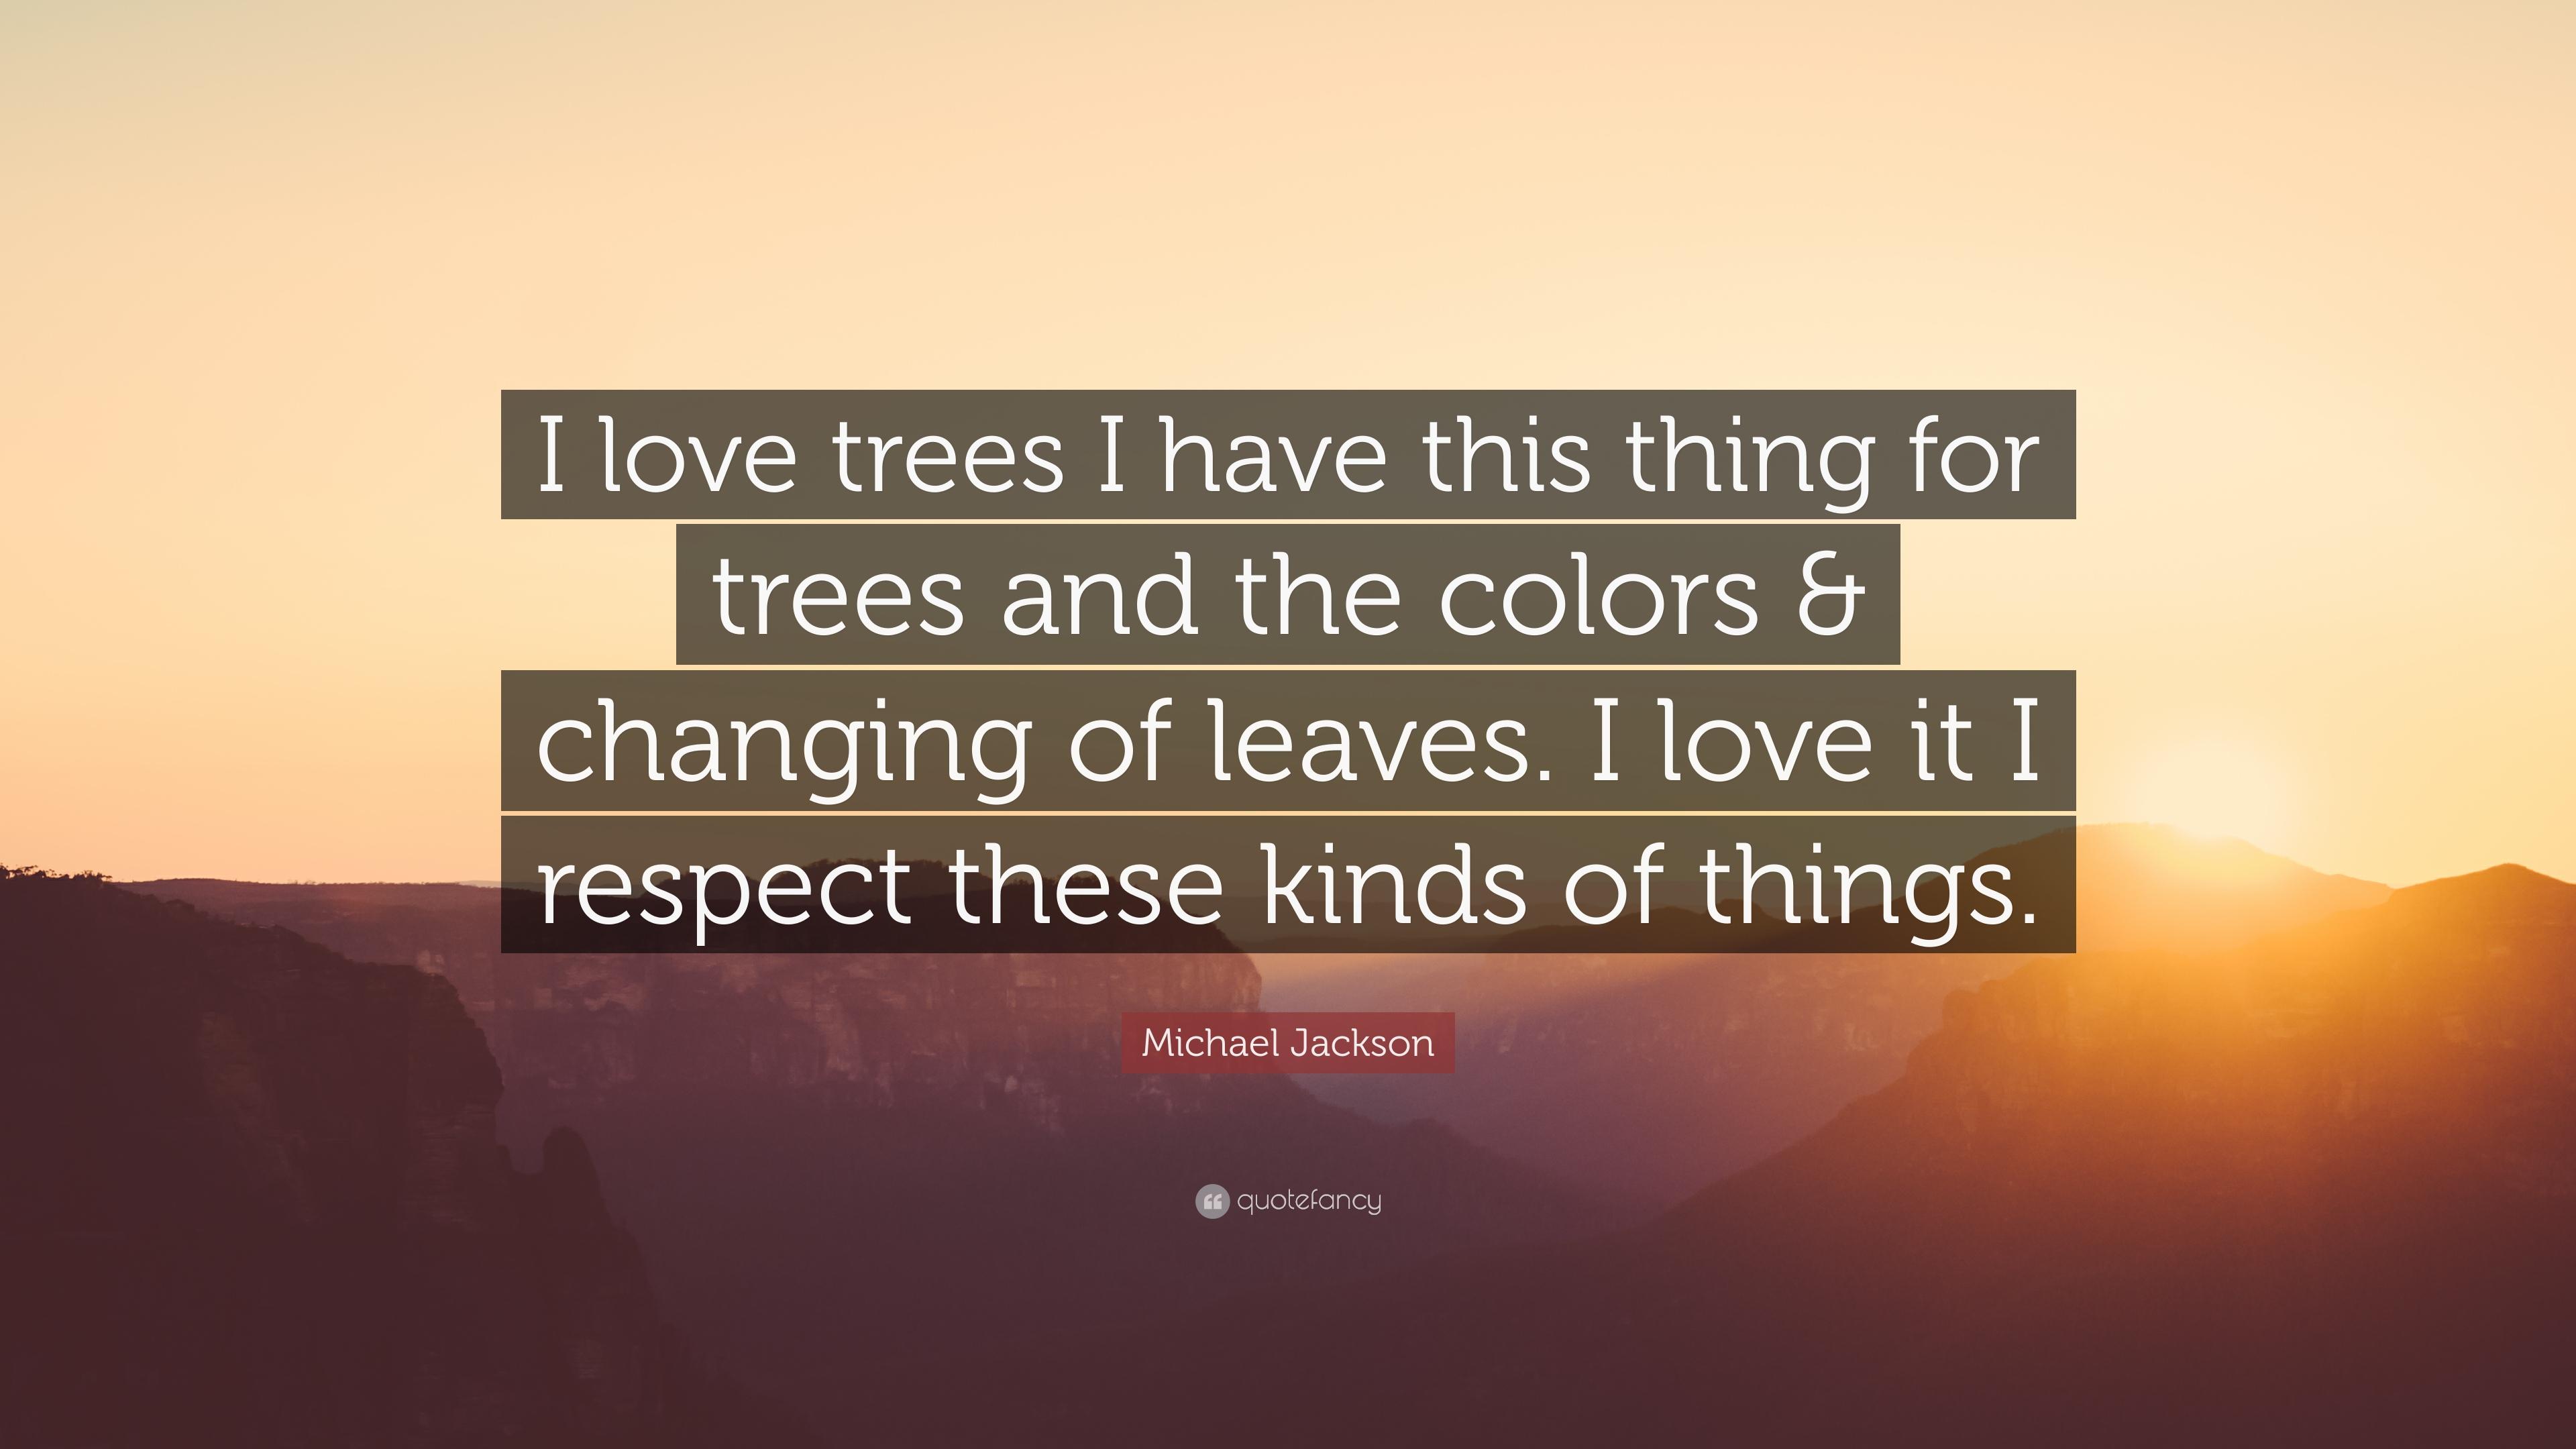 Michael Jackson Quote: “I love trees I have this thing